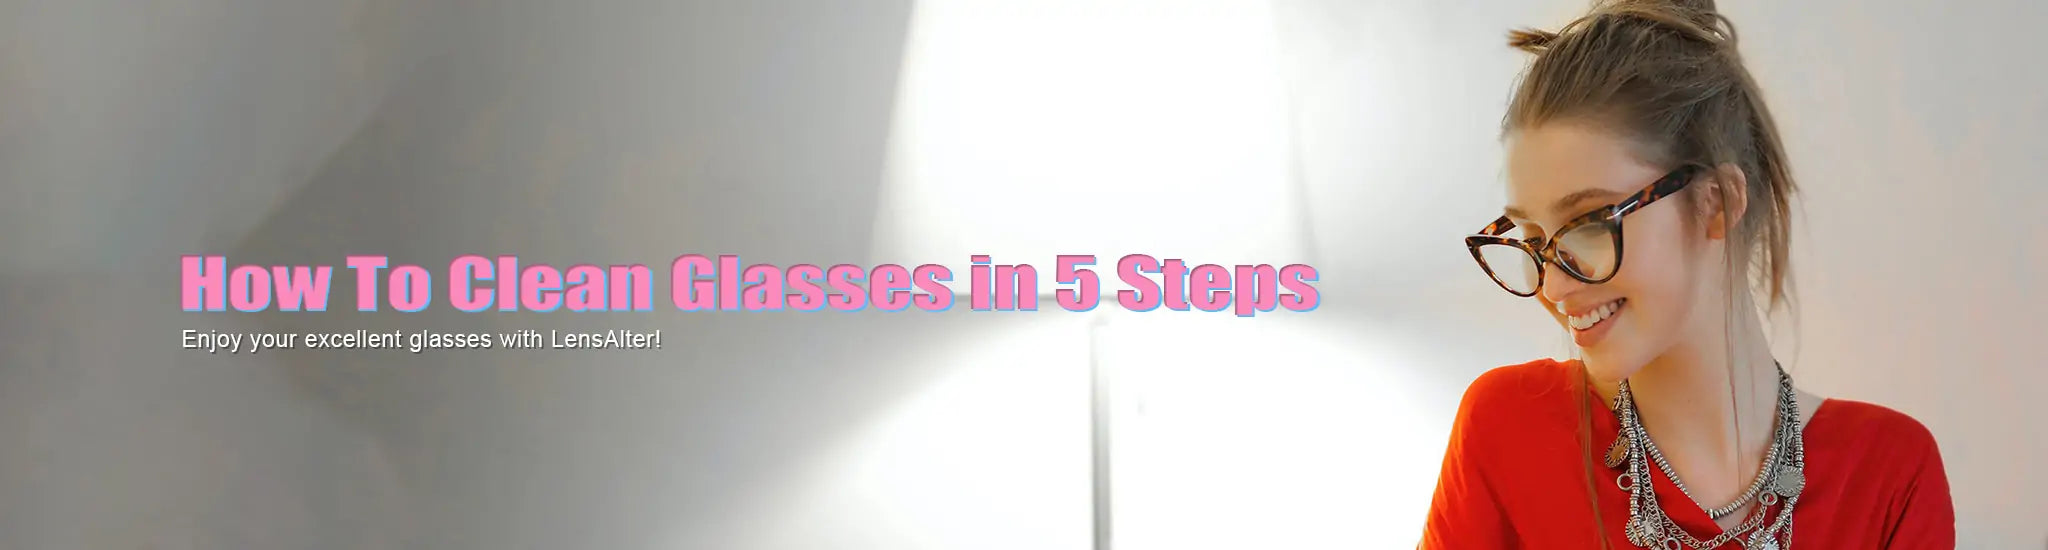 how-to-clean-glasses-in-5-steps